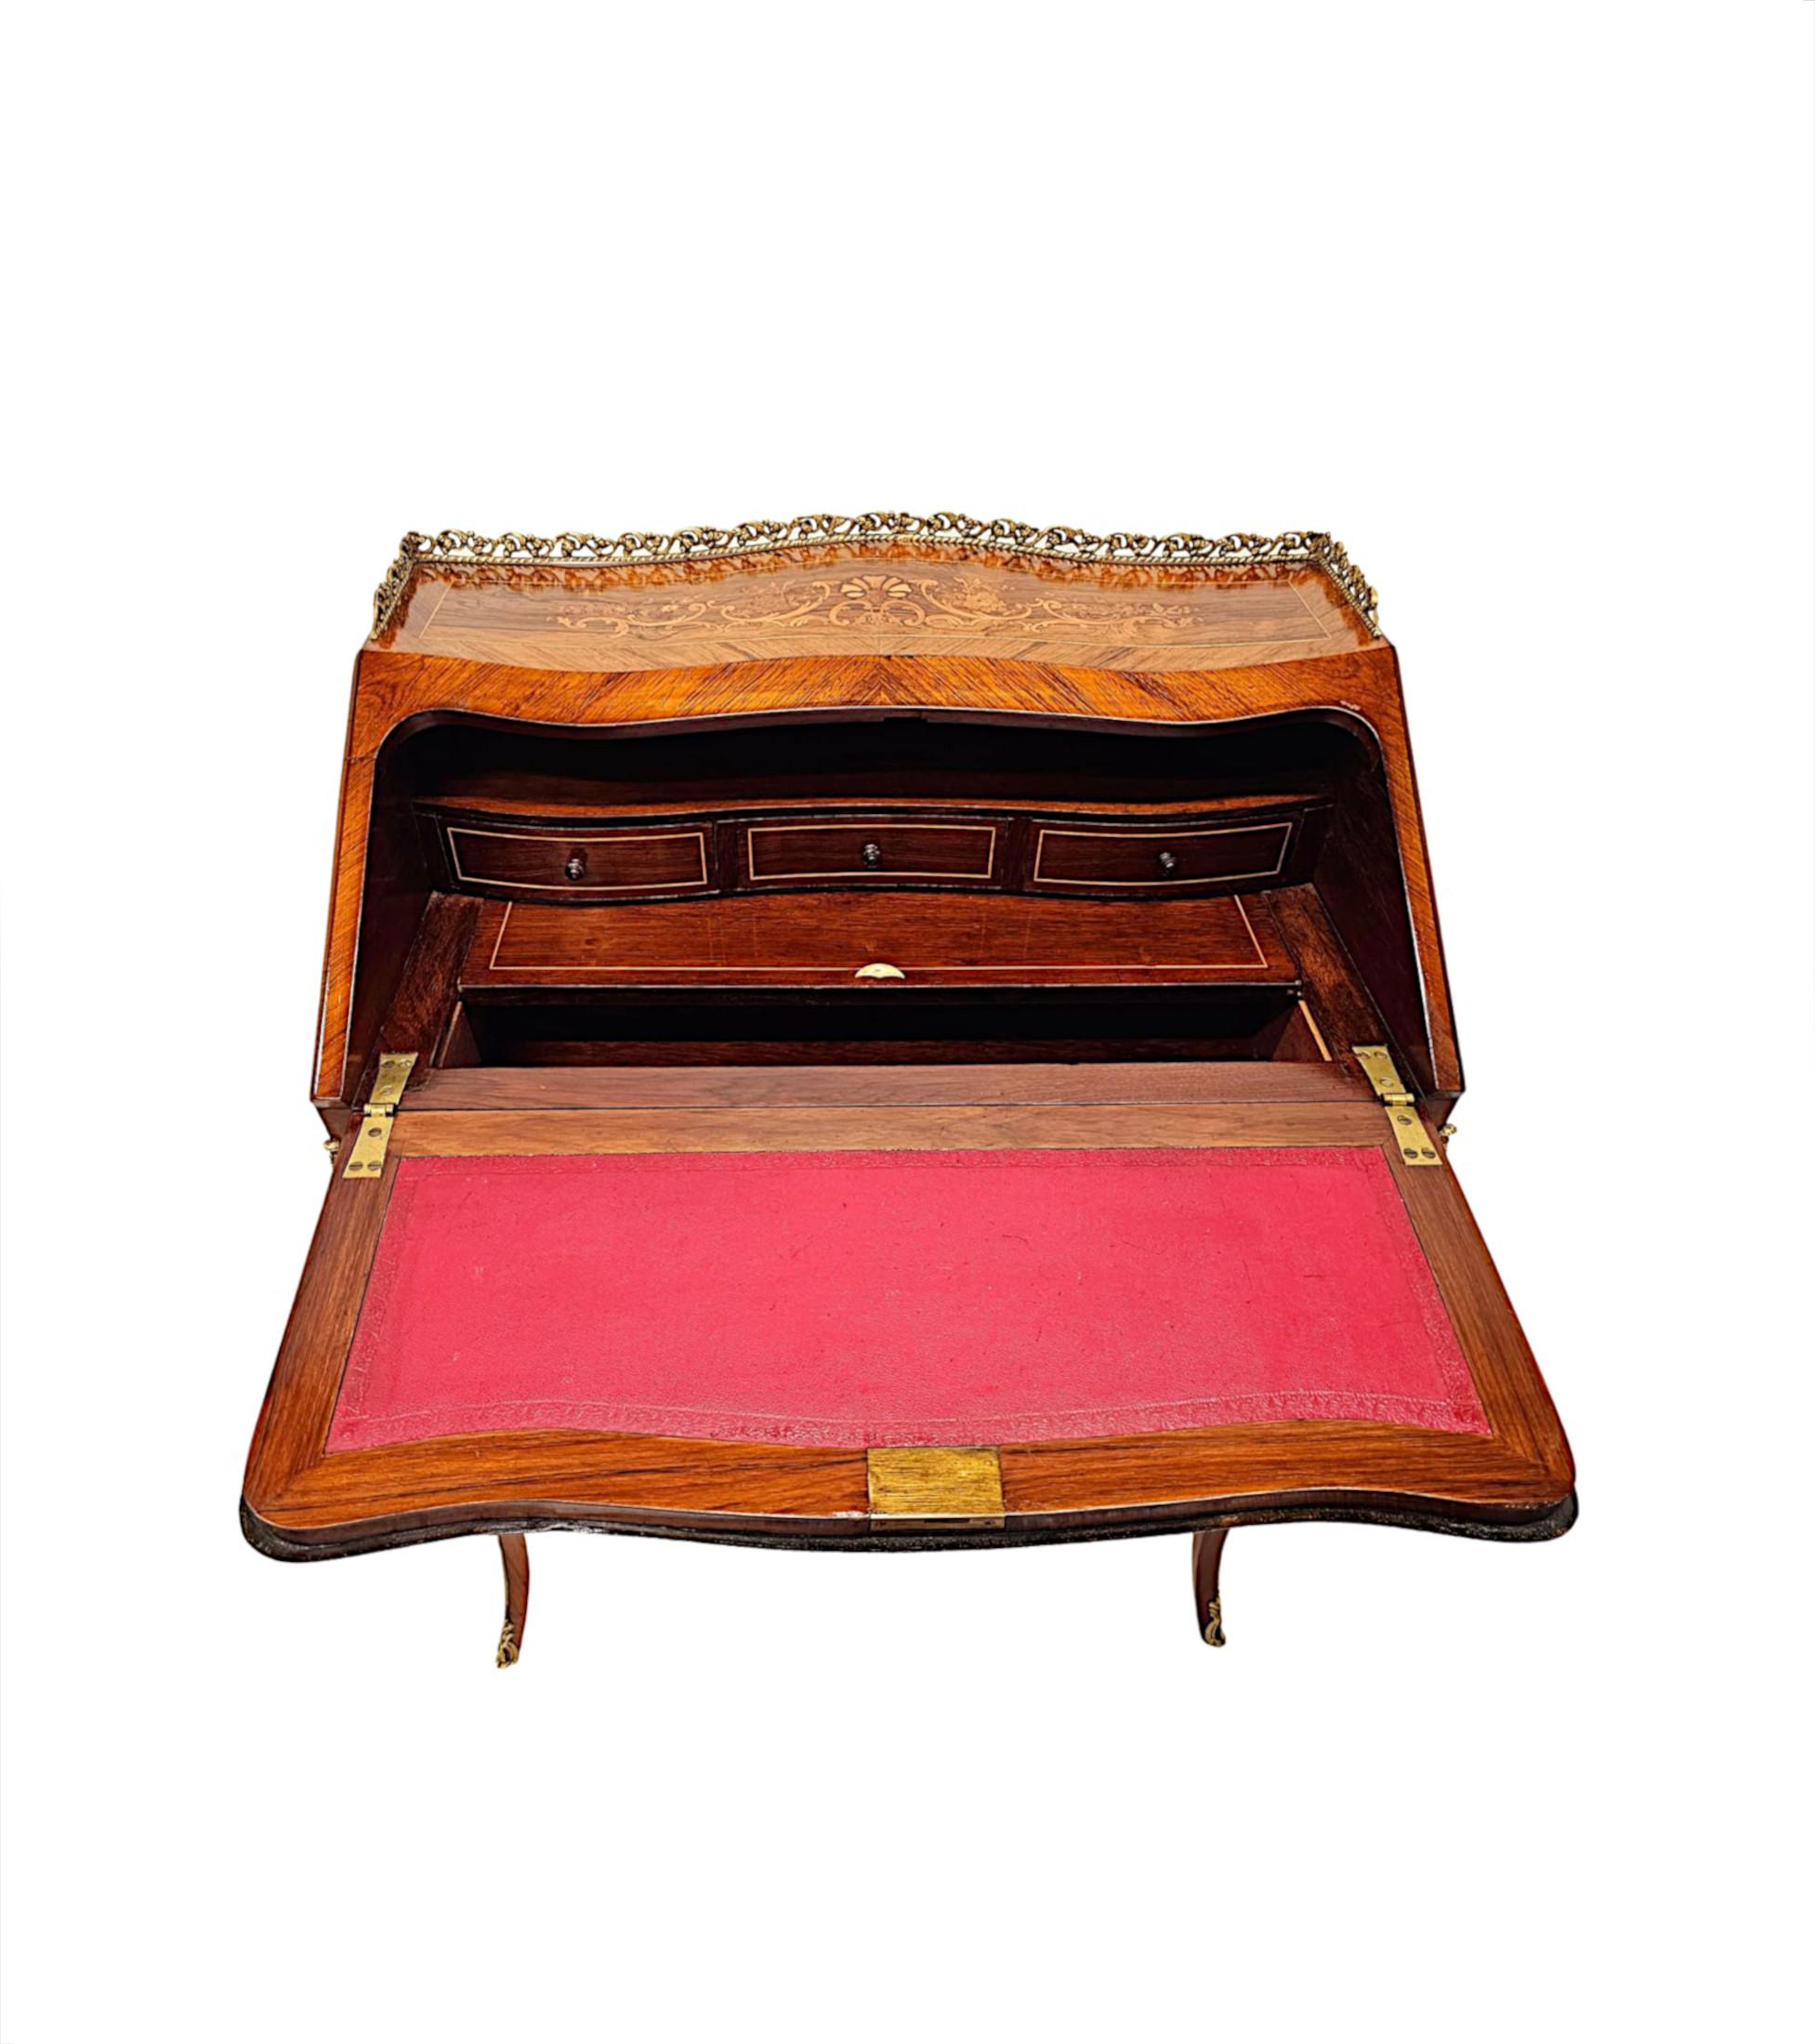 A Very Fine 19th Century Marquetry Inlaid Bureau Du Dame For Sale 1